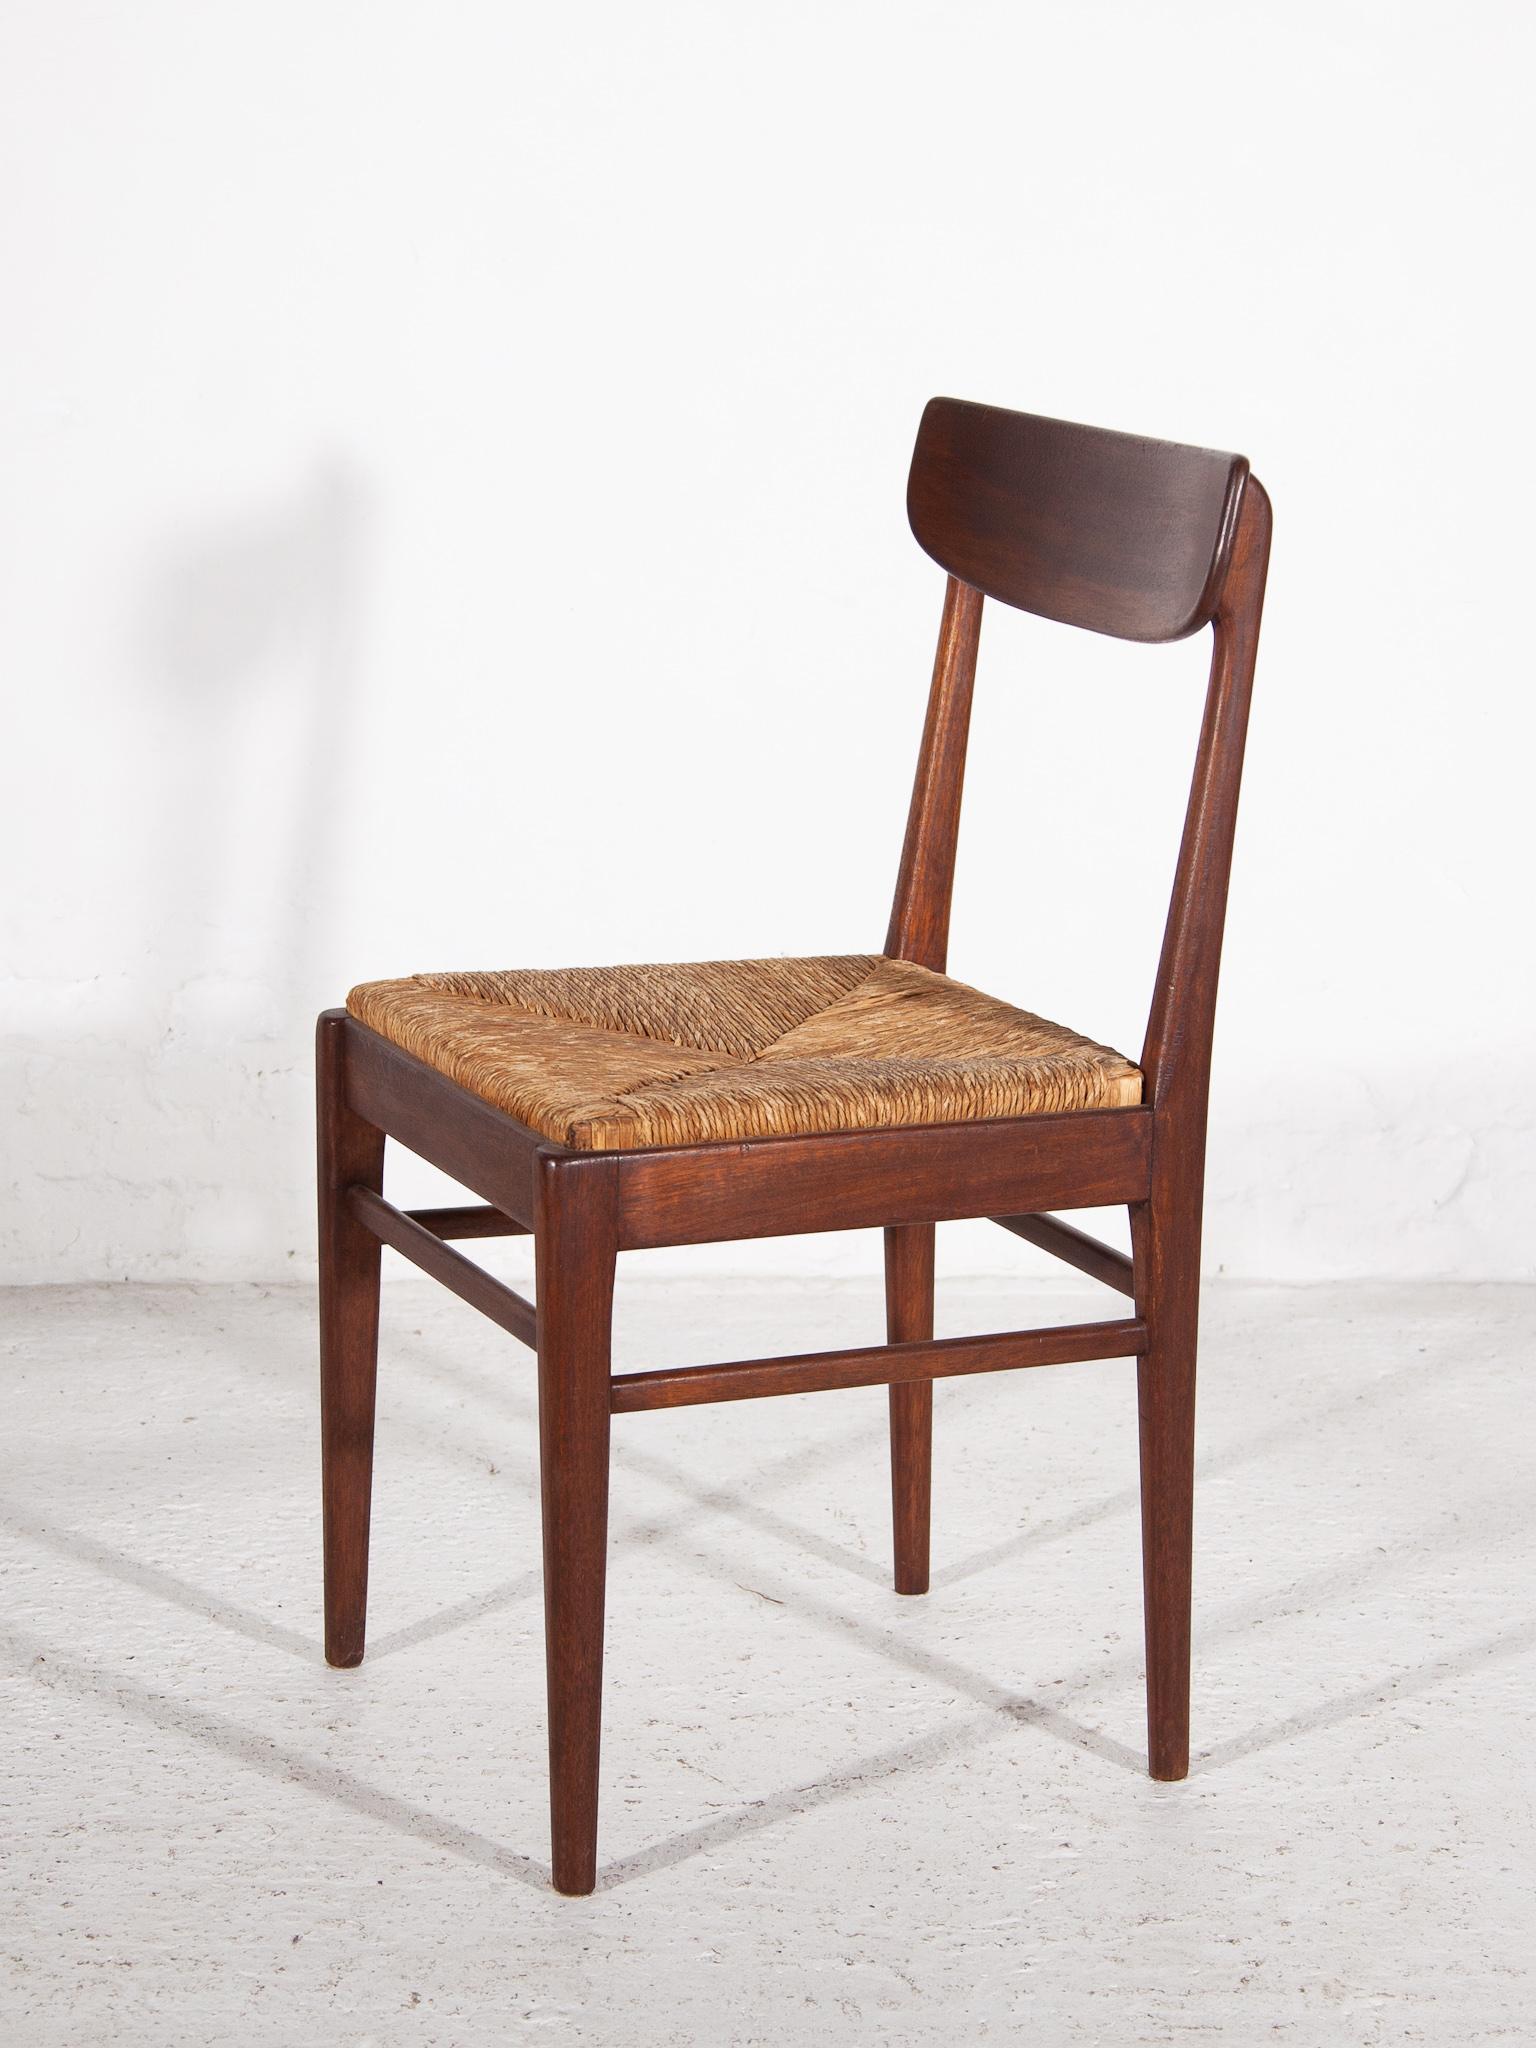 Teak Dining Chairs with Rattan Sea, t 1959, Belgium In Good Condition For Sale In Antwerp, BE